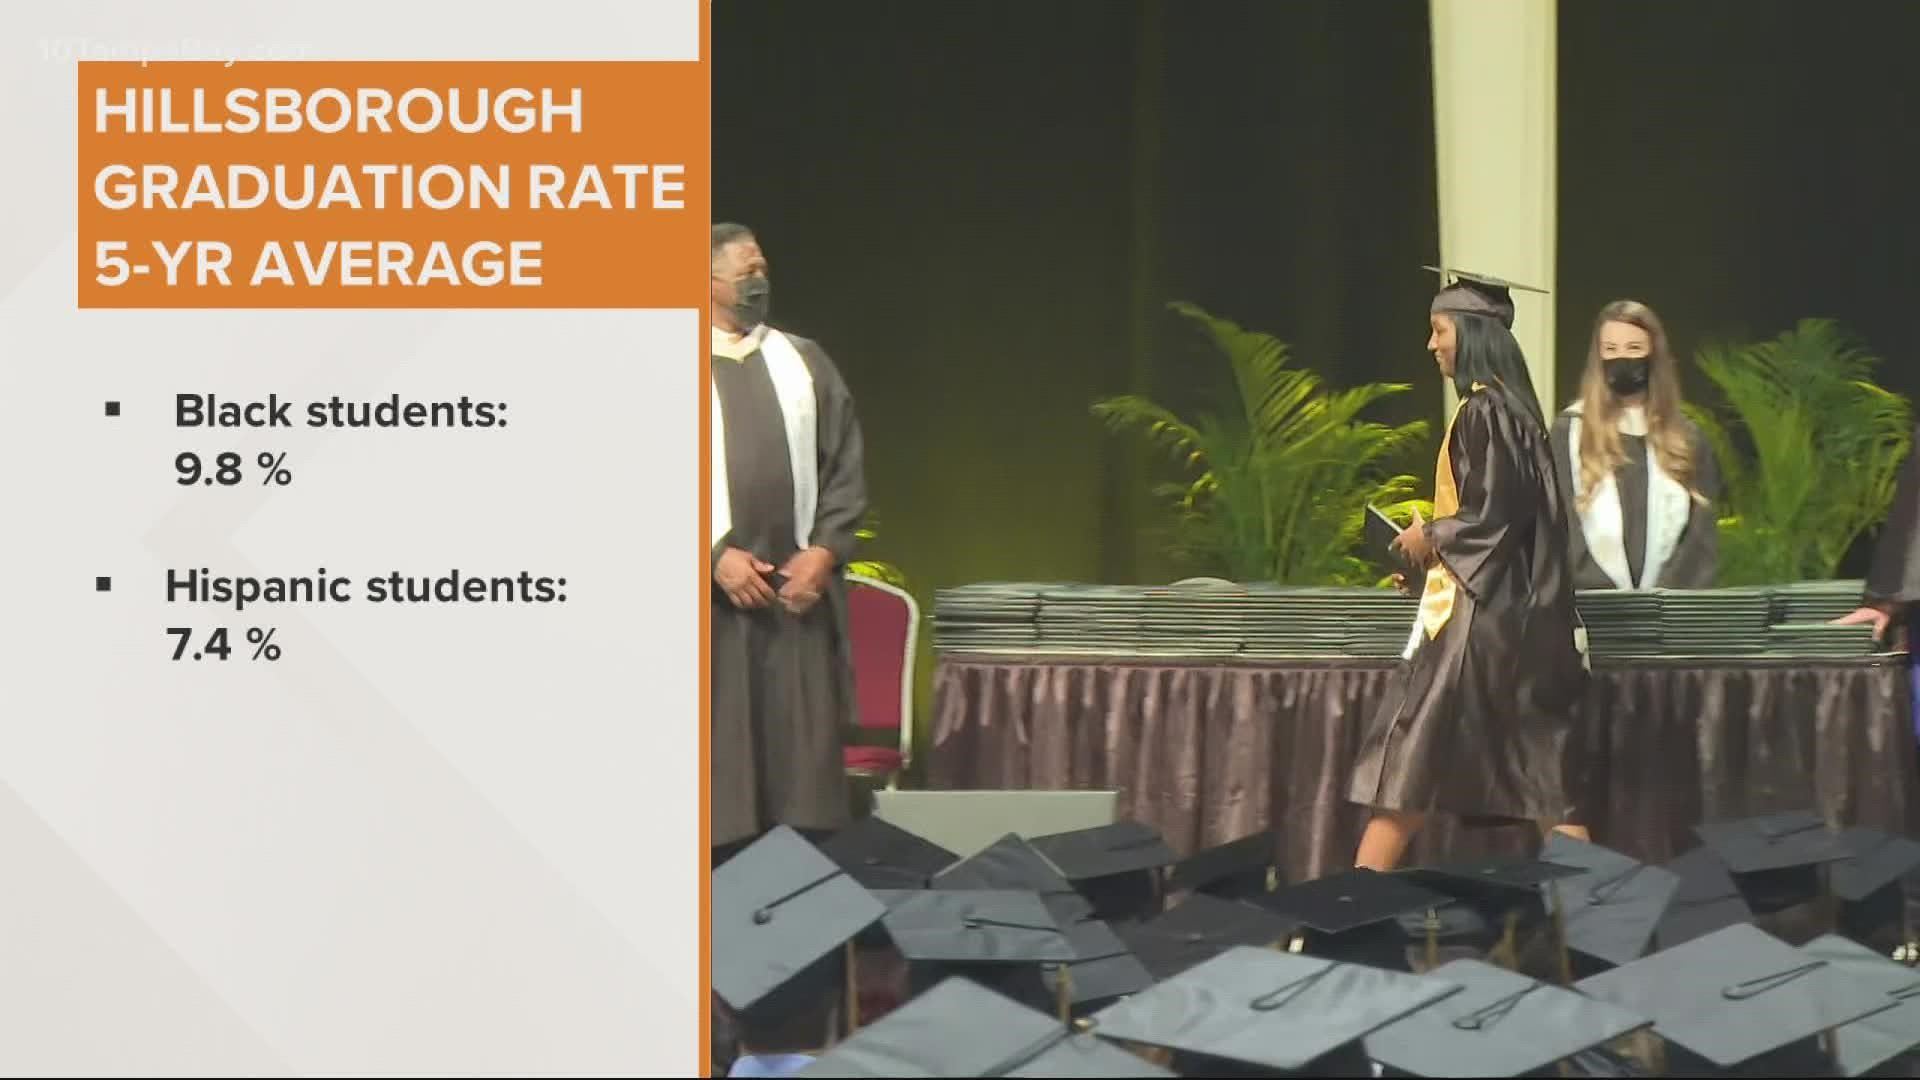 Pinellas County was also among counties with the highest graduation rates.